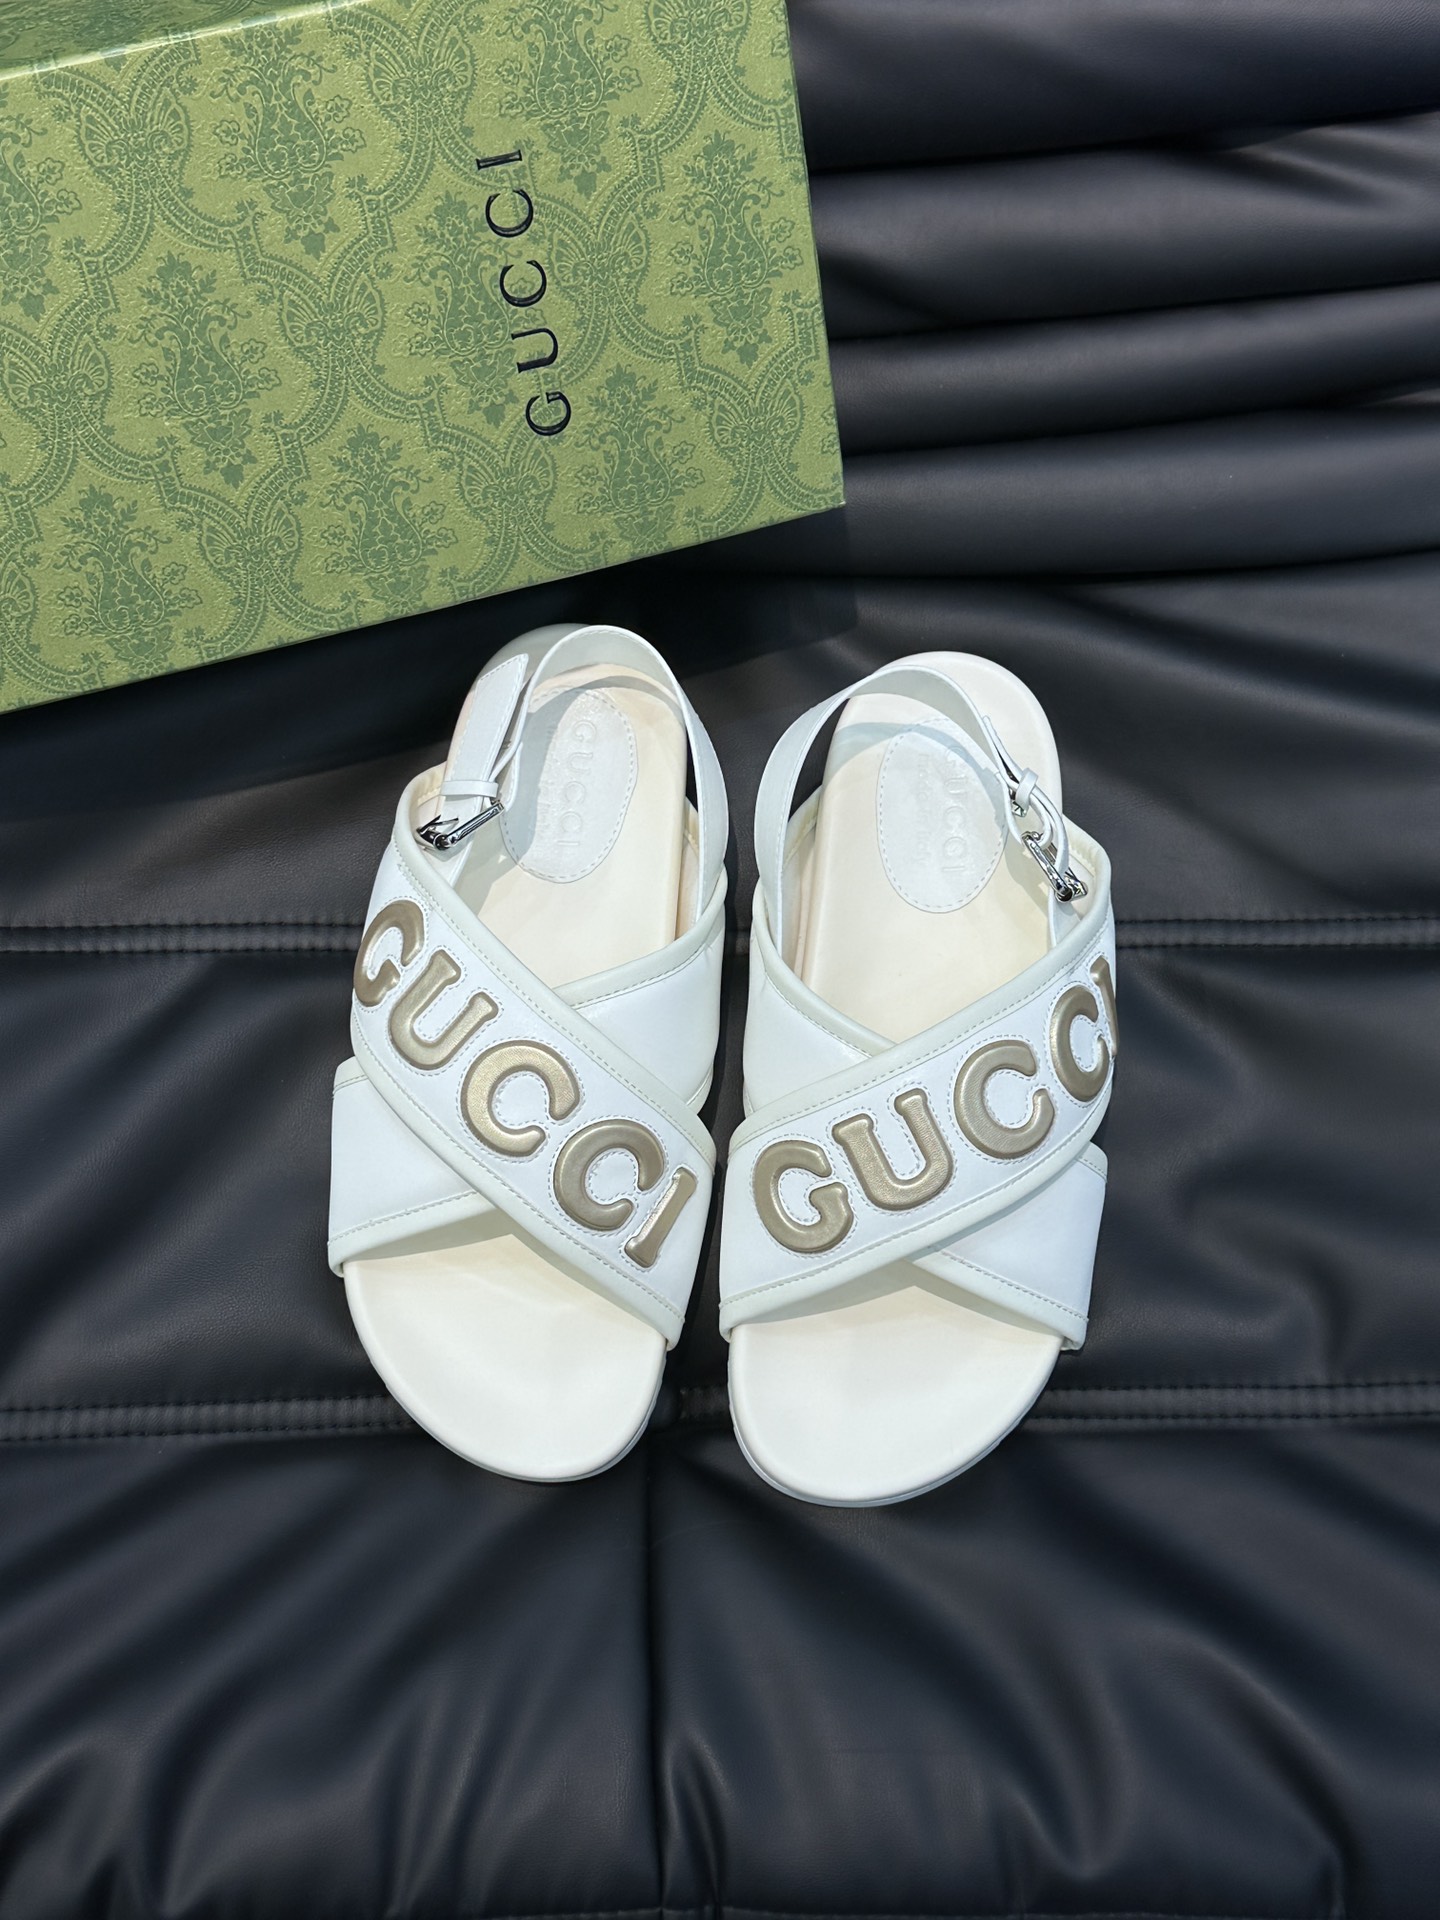 Gucci Shoes Sandals Slippers High Quality 1:1 Replica
 Unisex Cowhide TPU Spring/Summer Collection Fashion